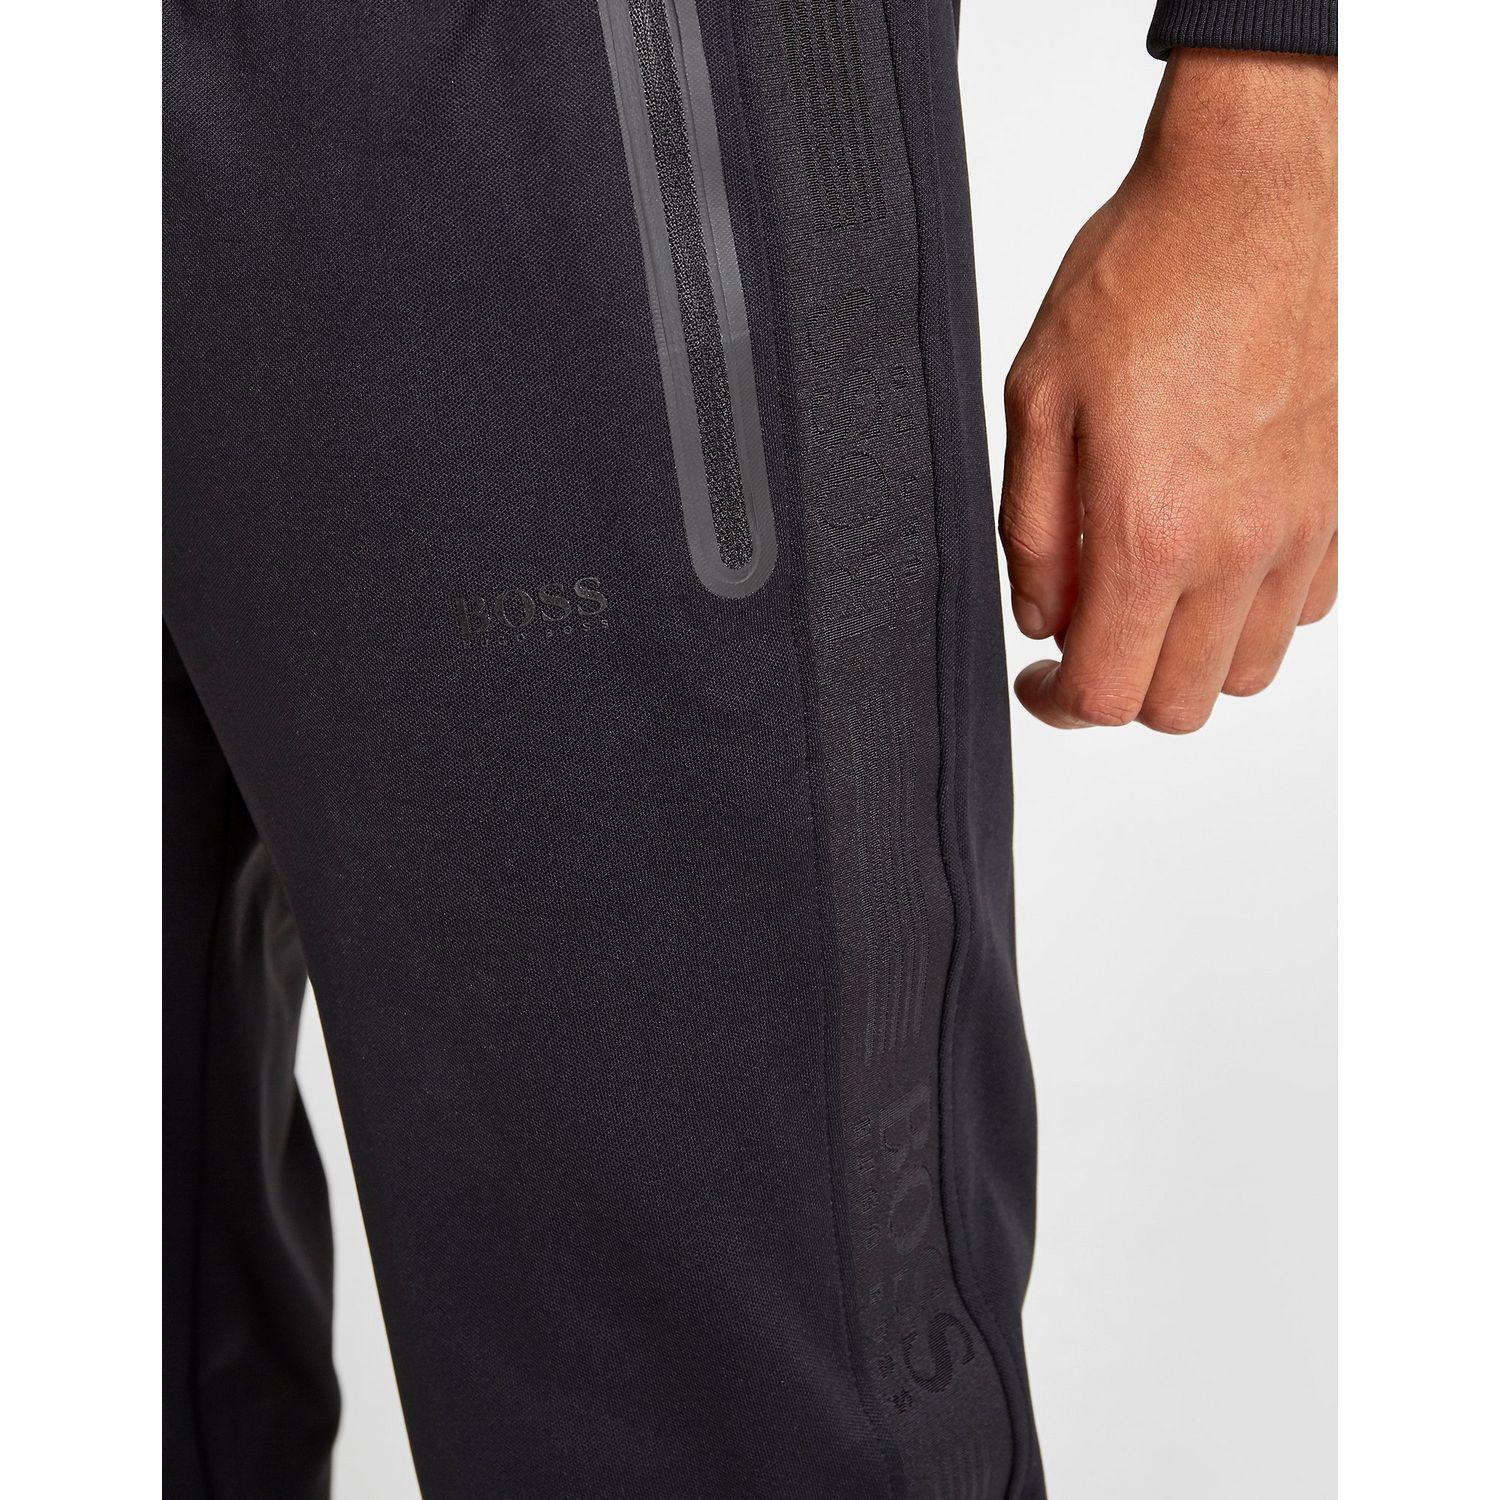 hugo boss poly tracksuit off 52% - www.globalist.management